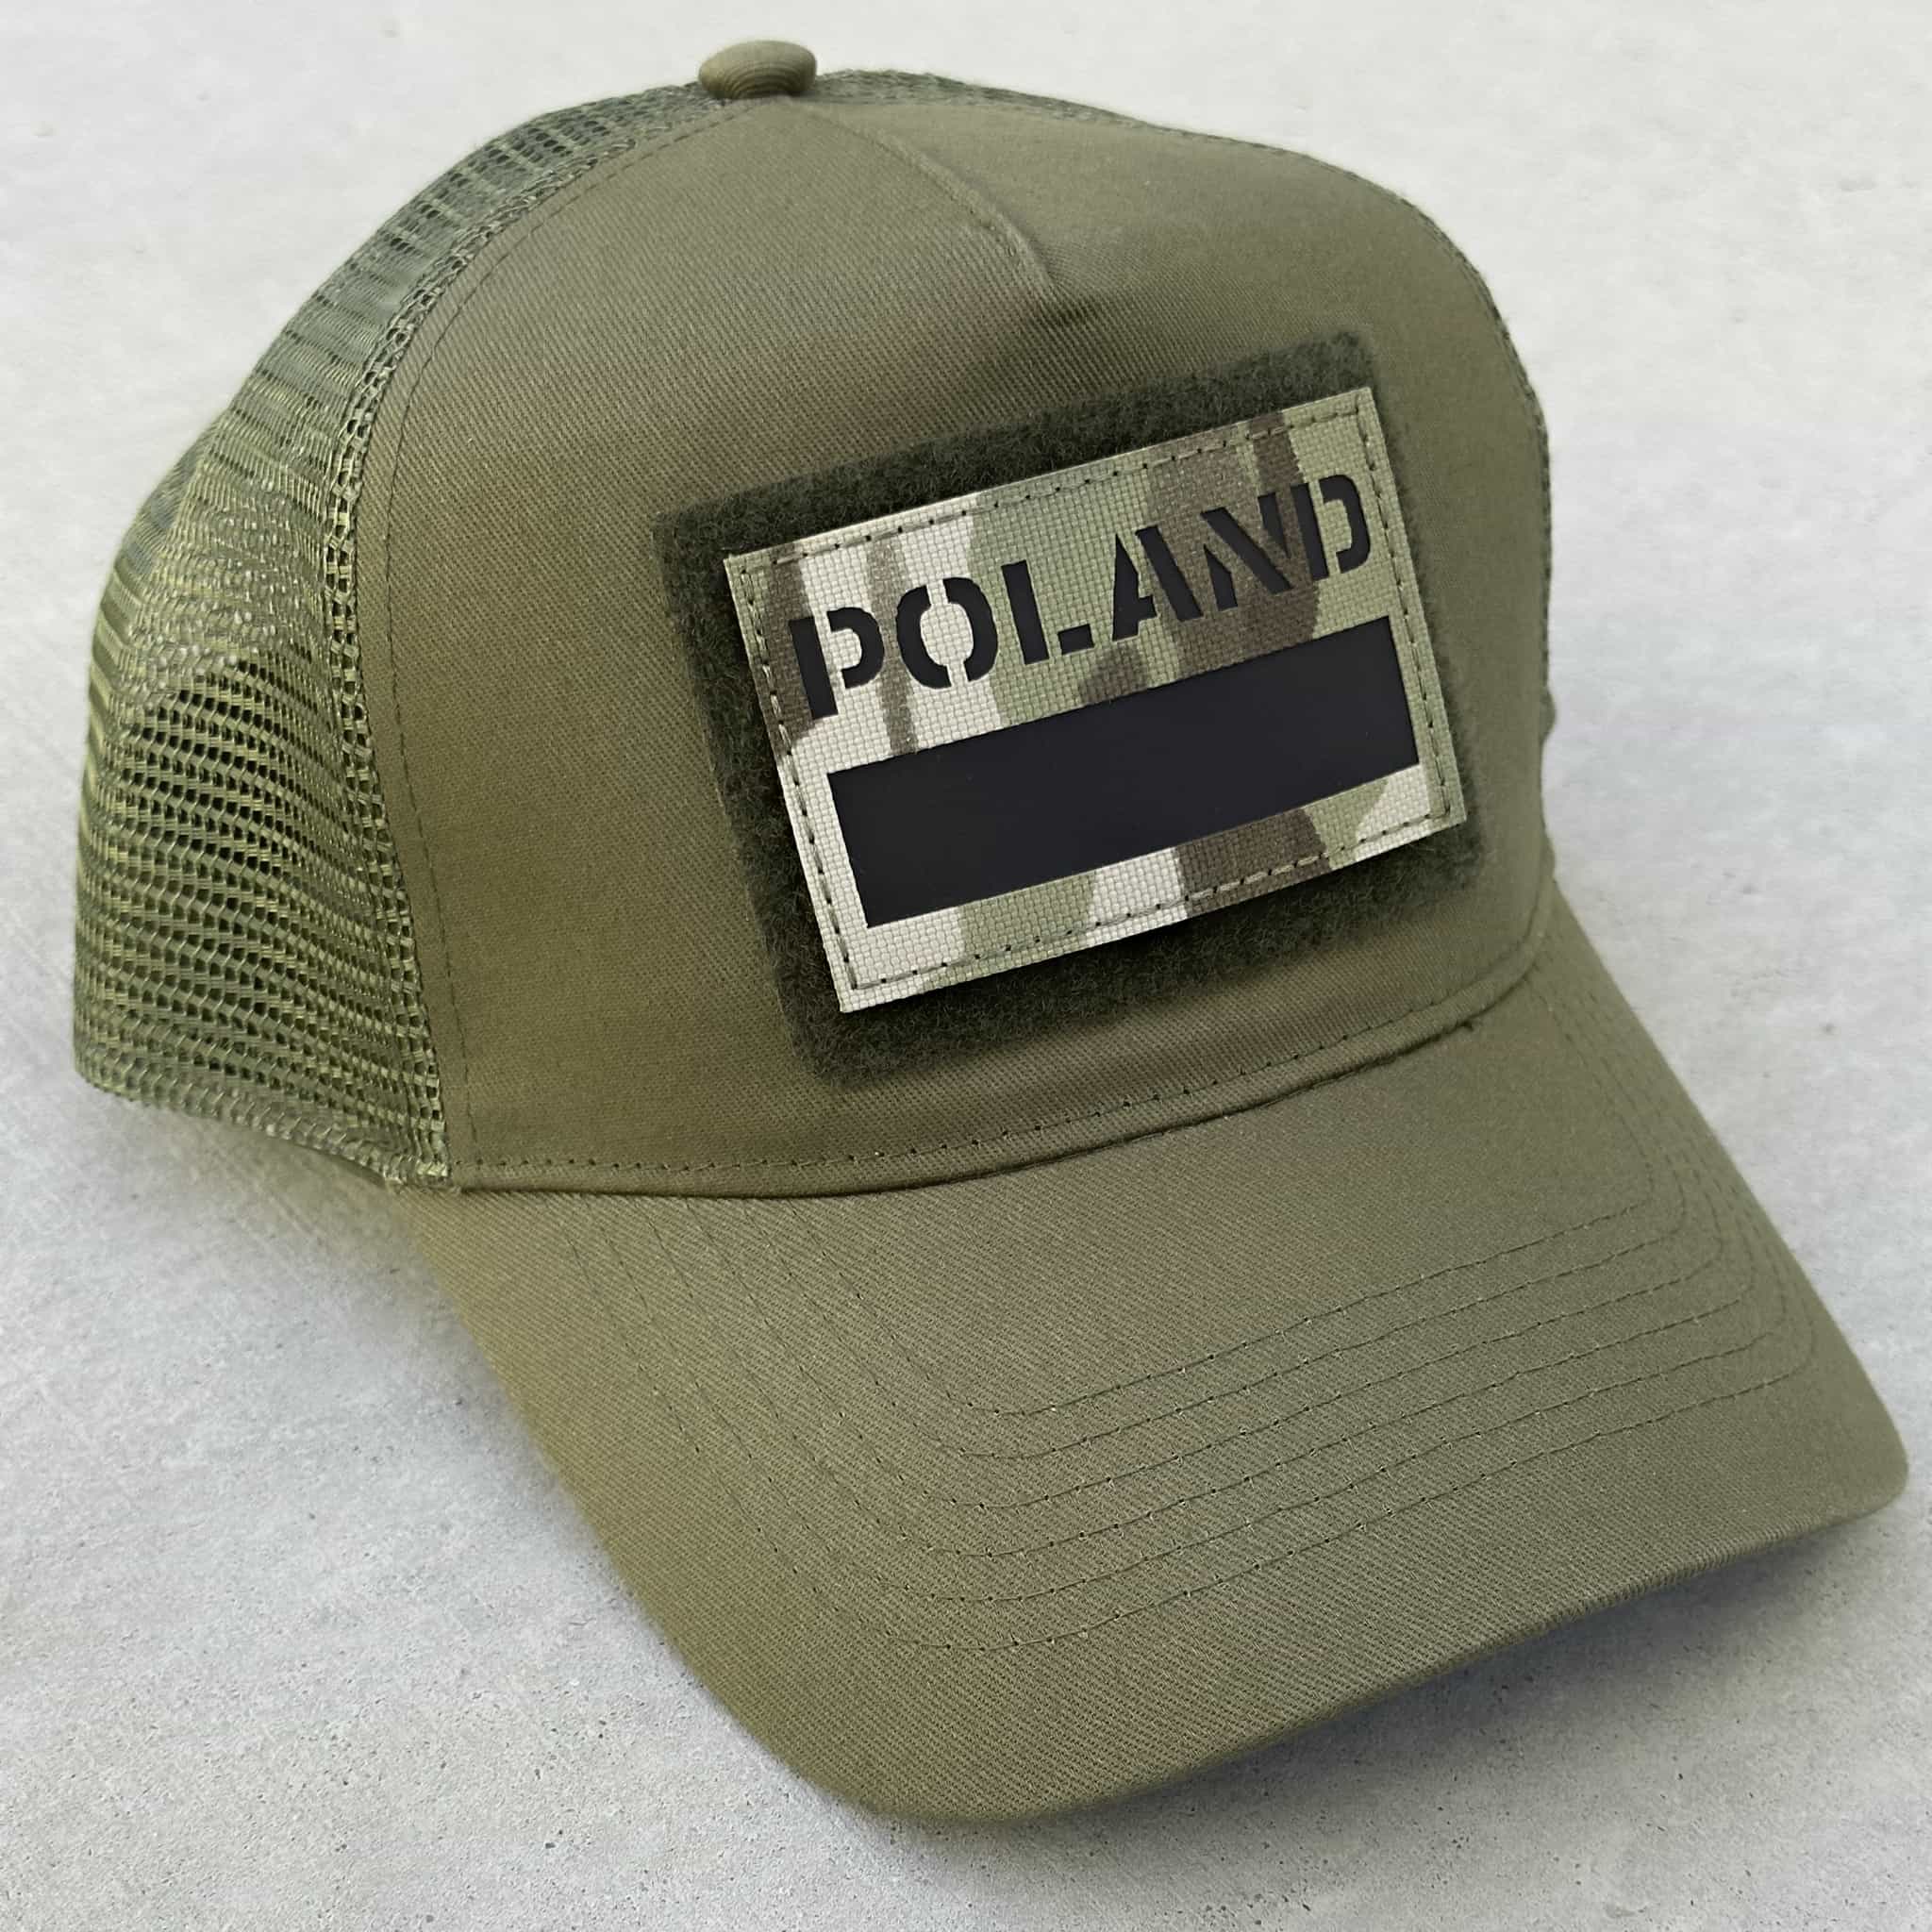 The trucker snapback cap in military green with Poland flag patch attached